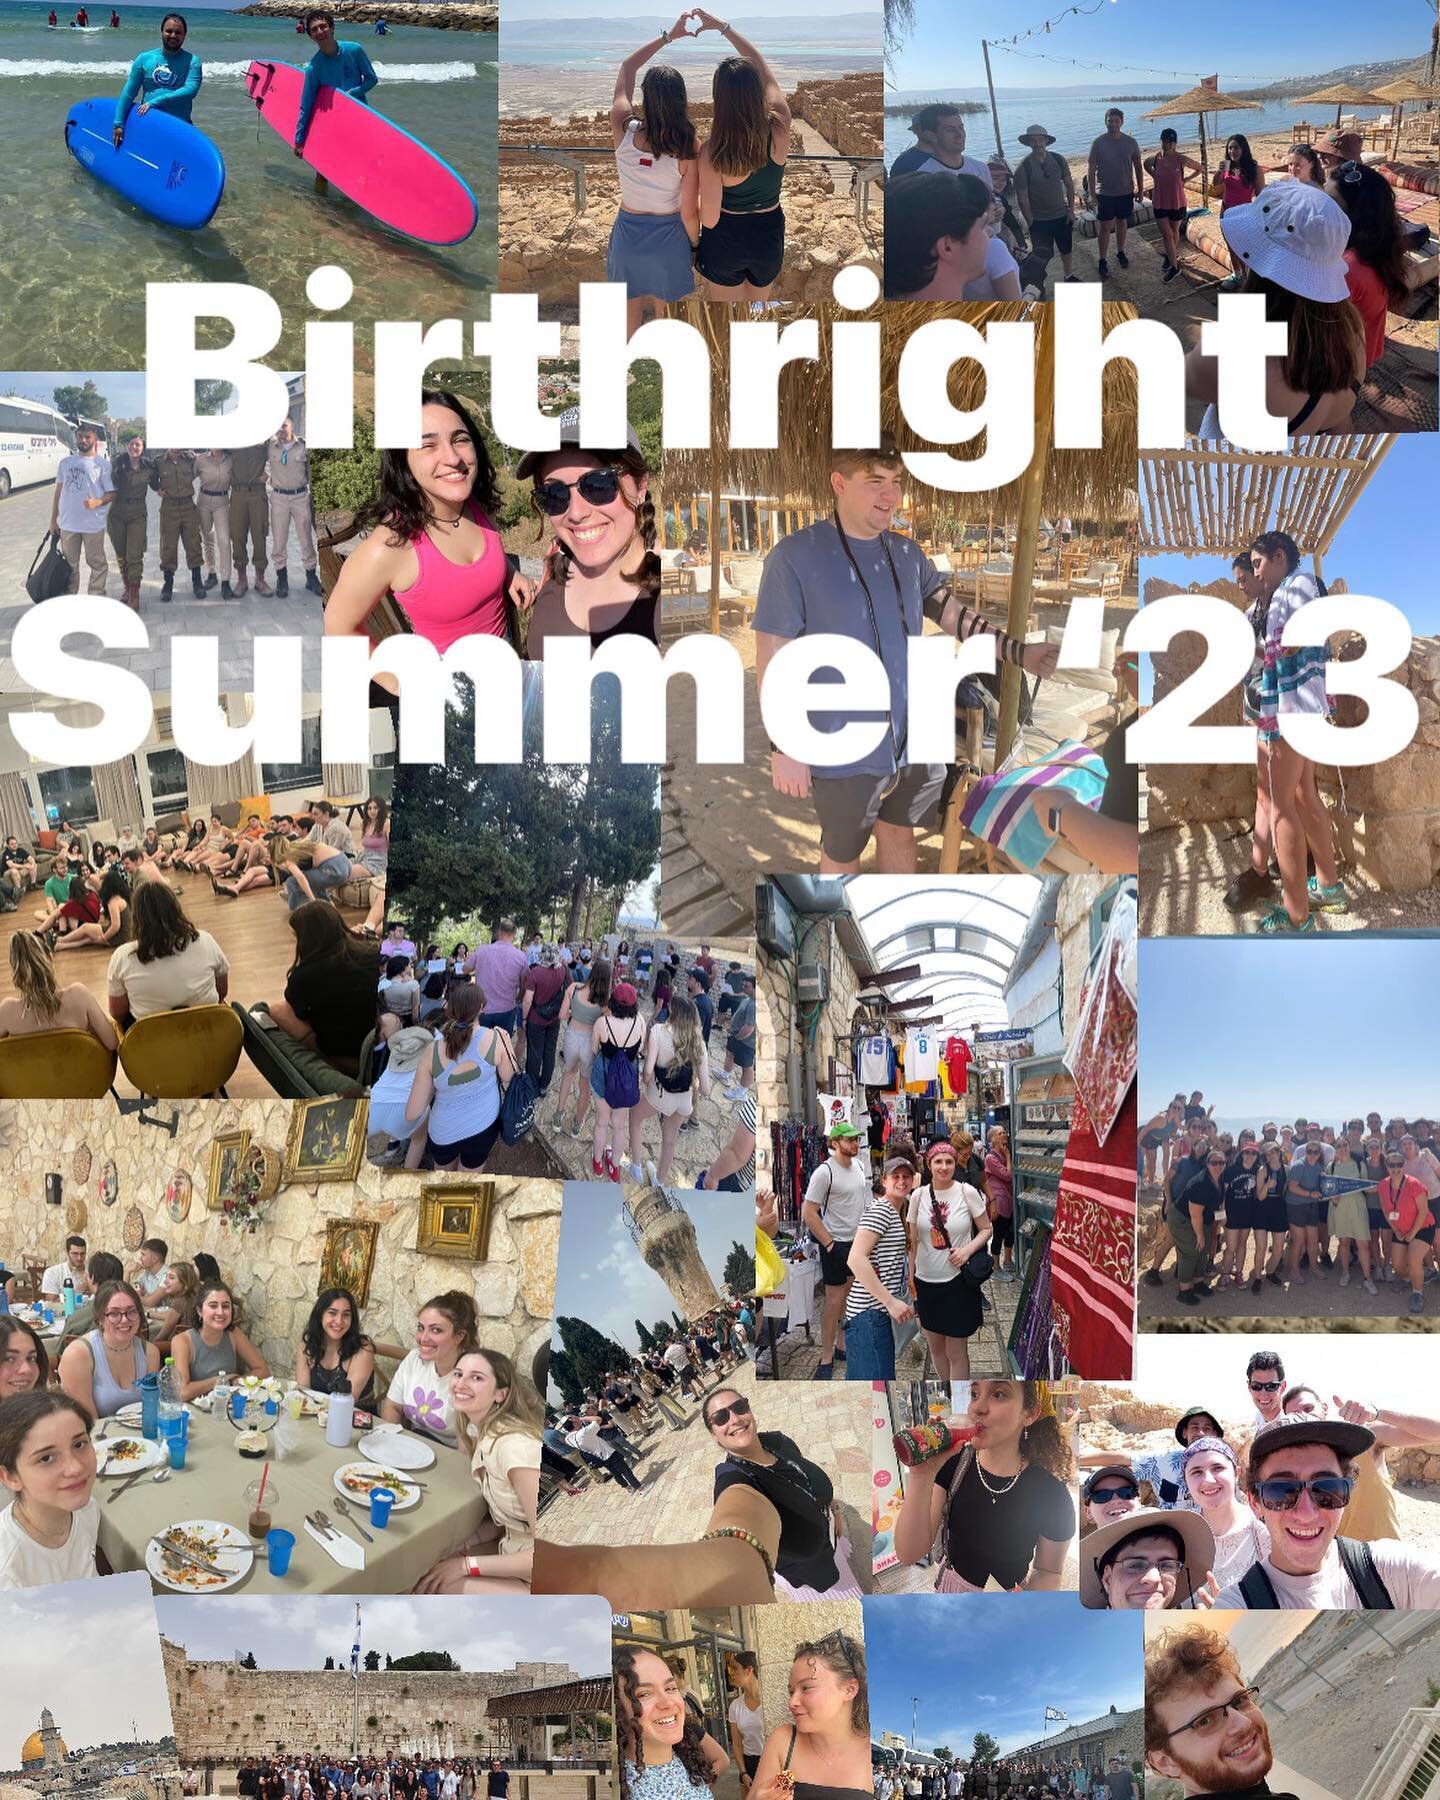 6️⃣ days until Brandeis Birthright Winter &lsquo;23/&lsquo;24 registration opens! 
🇮🇱🇮🇱🇮🇱🇮🇱🇮🇱🇮🇱🇮🇱🇮🇱🇮🇱🇮🇱🇮🇱

Want to pre register? 

DM me and you will be added to the list! 

Registration is open from 9/6 through 9/16. 

We depar